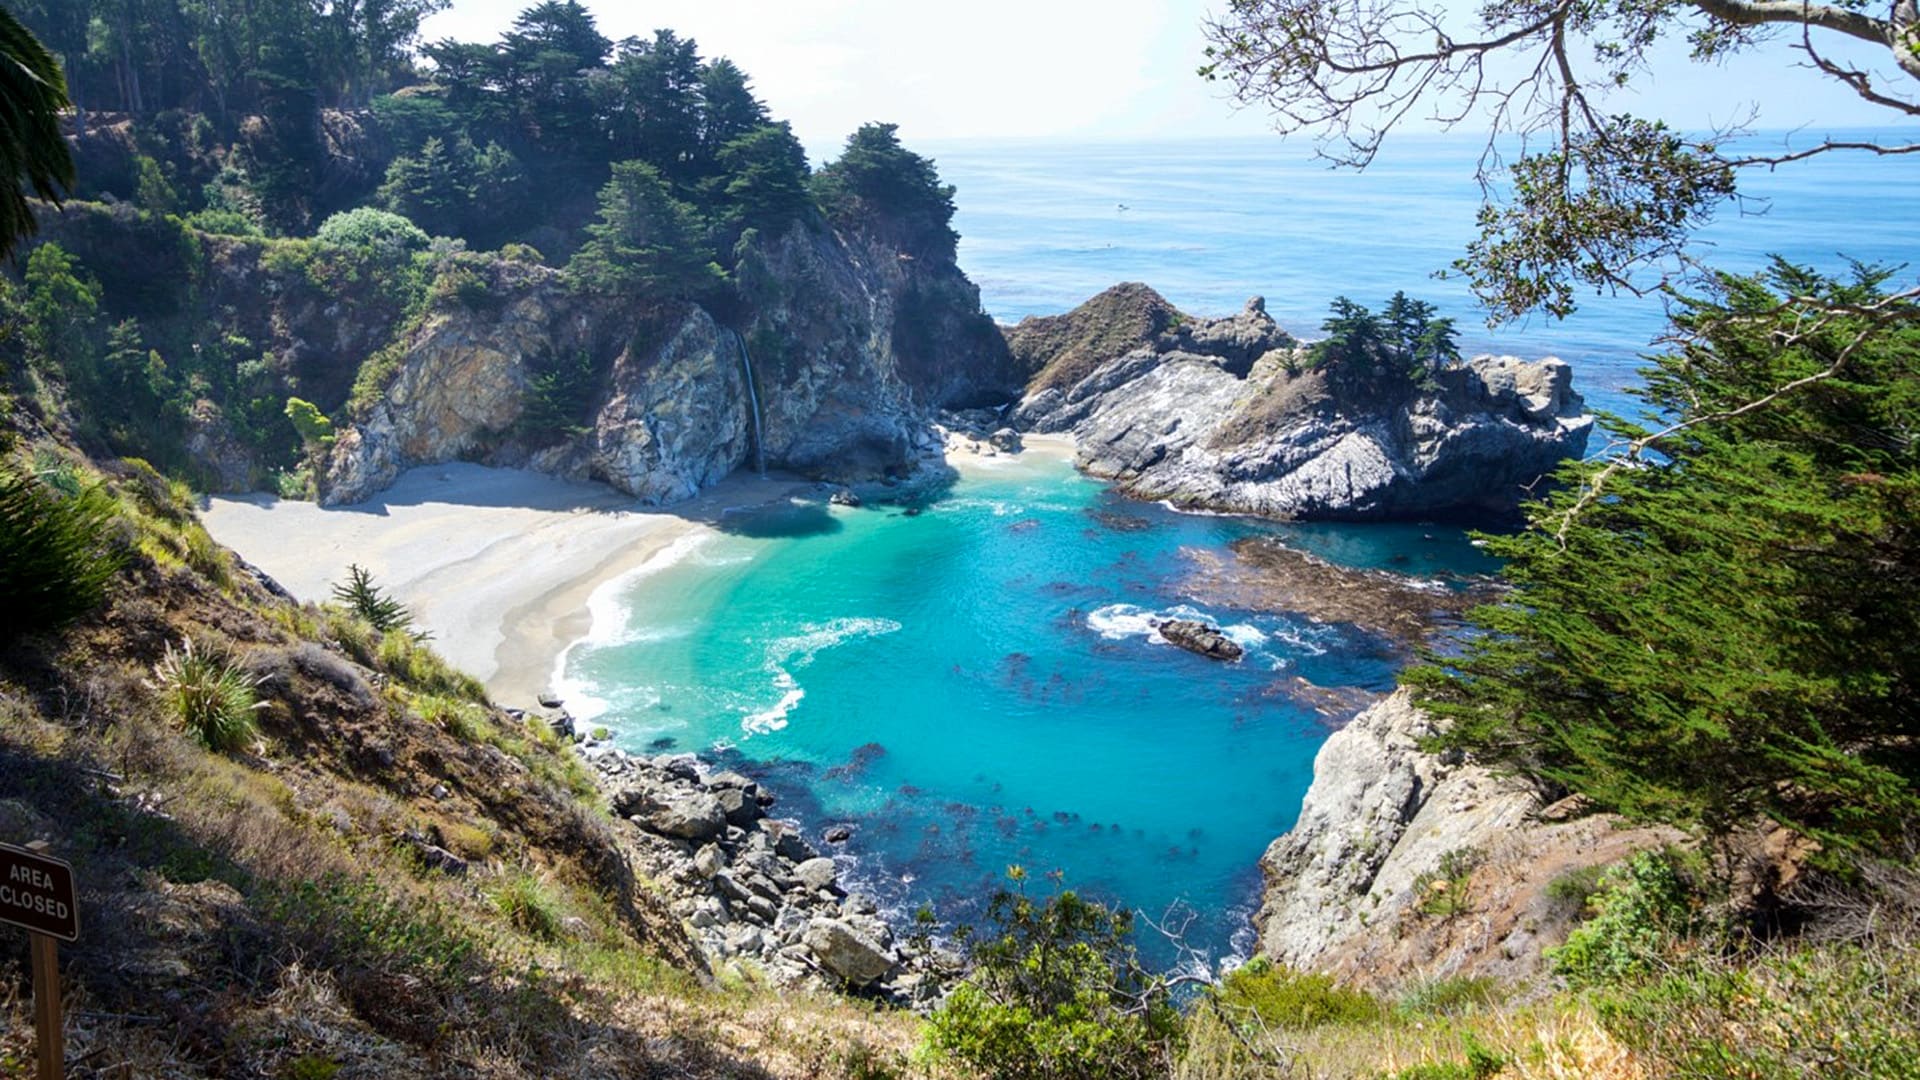 Julia Pfeiffer Burns State Park on the coast of Big Sur features the 80-foot McWay Falls.